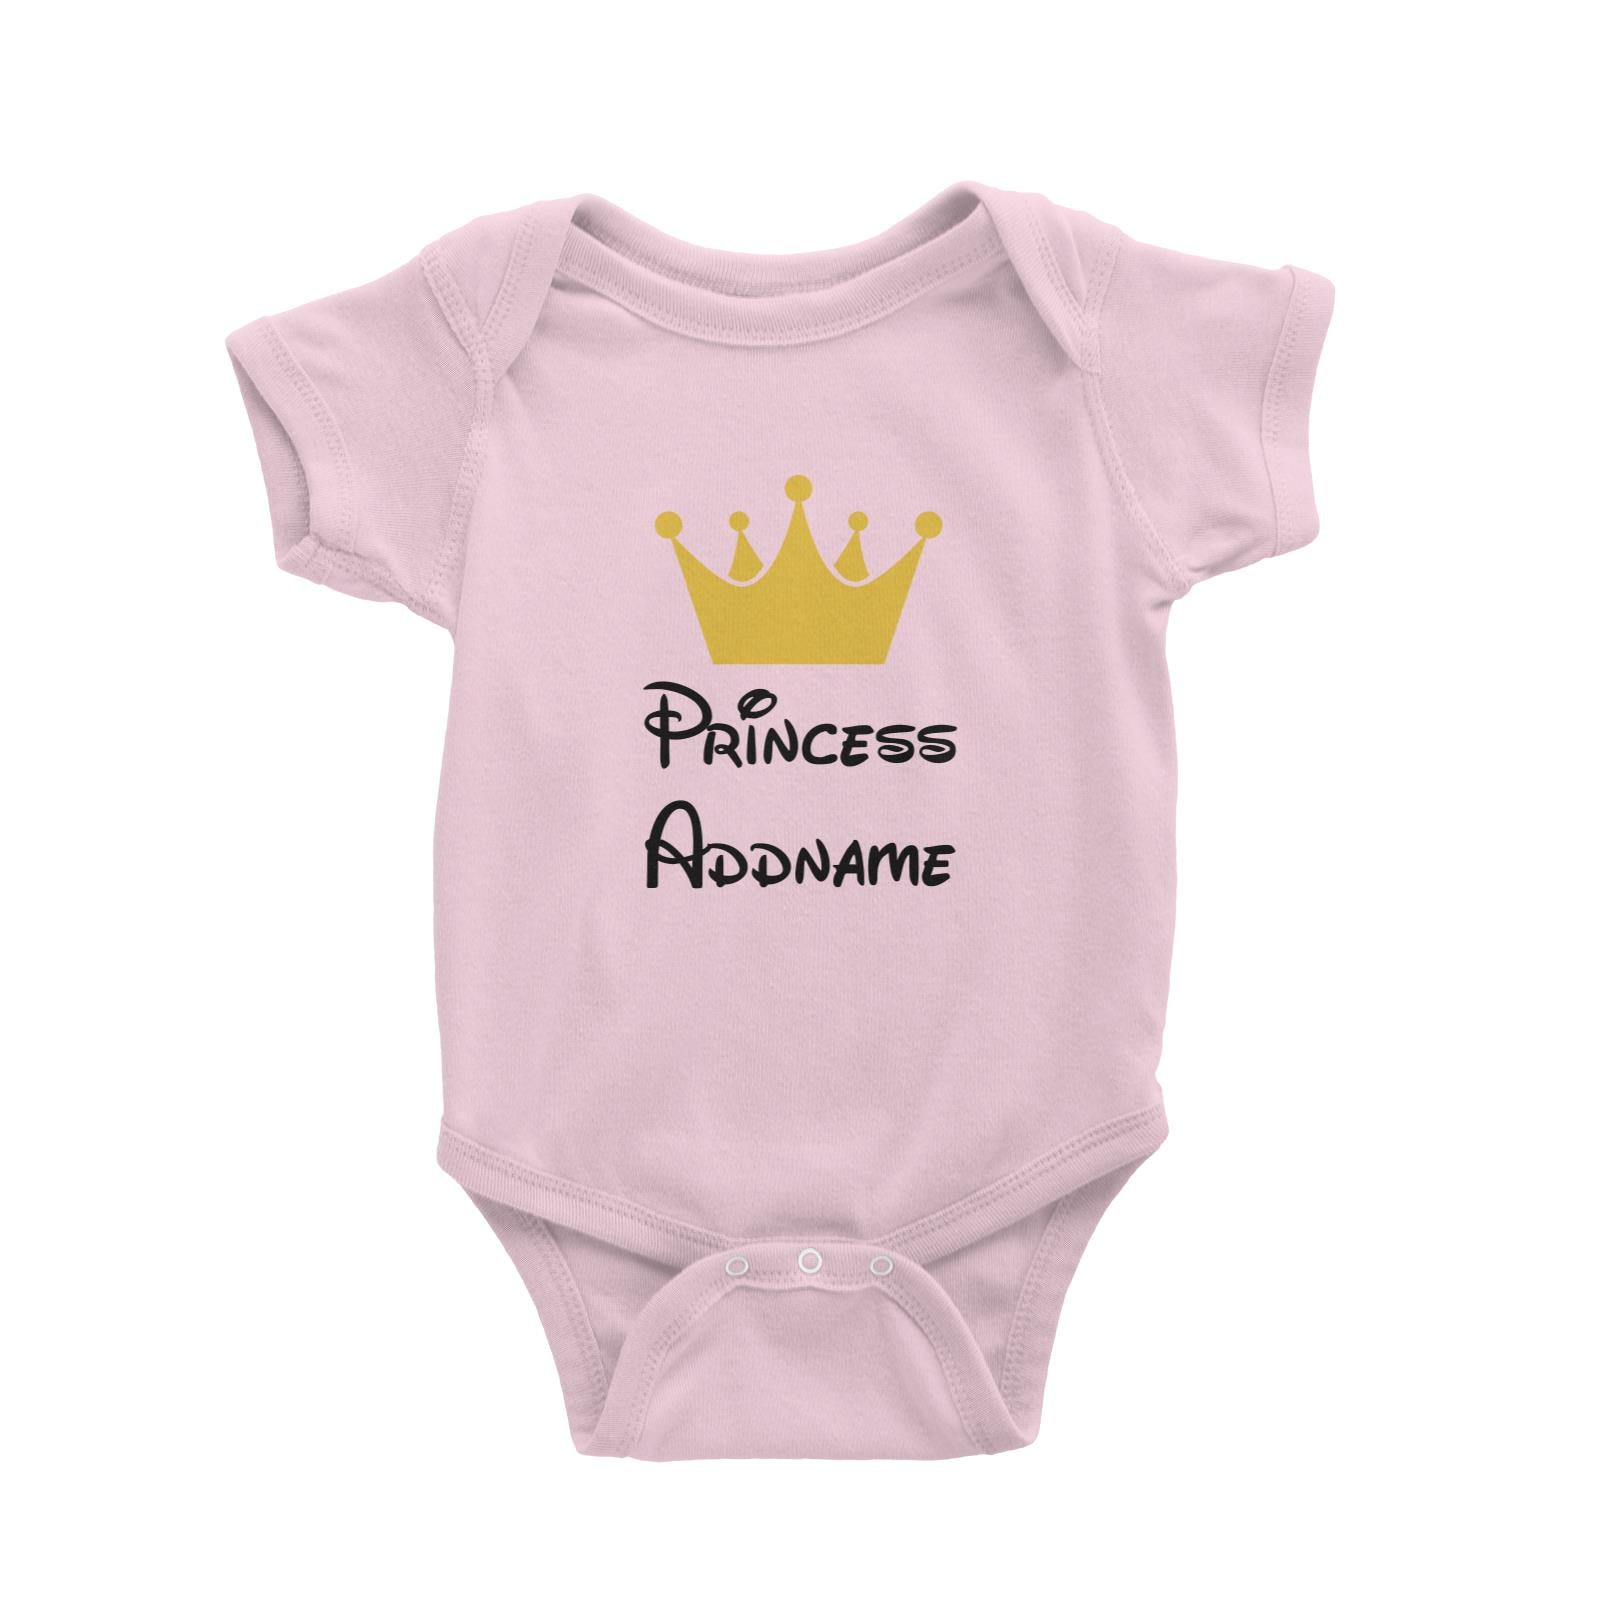 Royal Princess with Tiara Addname Baby Romper  Matching Family Personalizable Designs